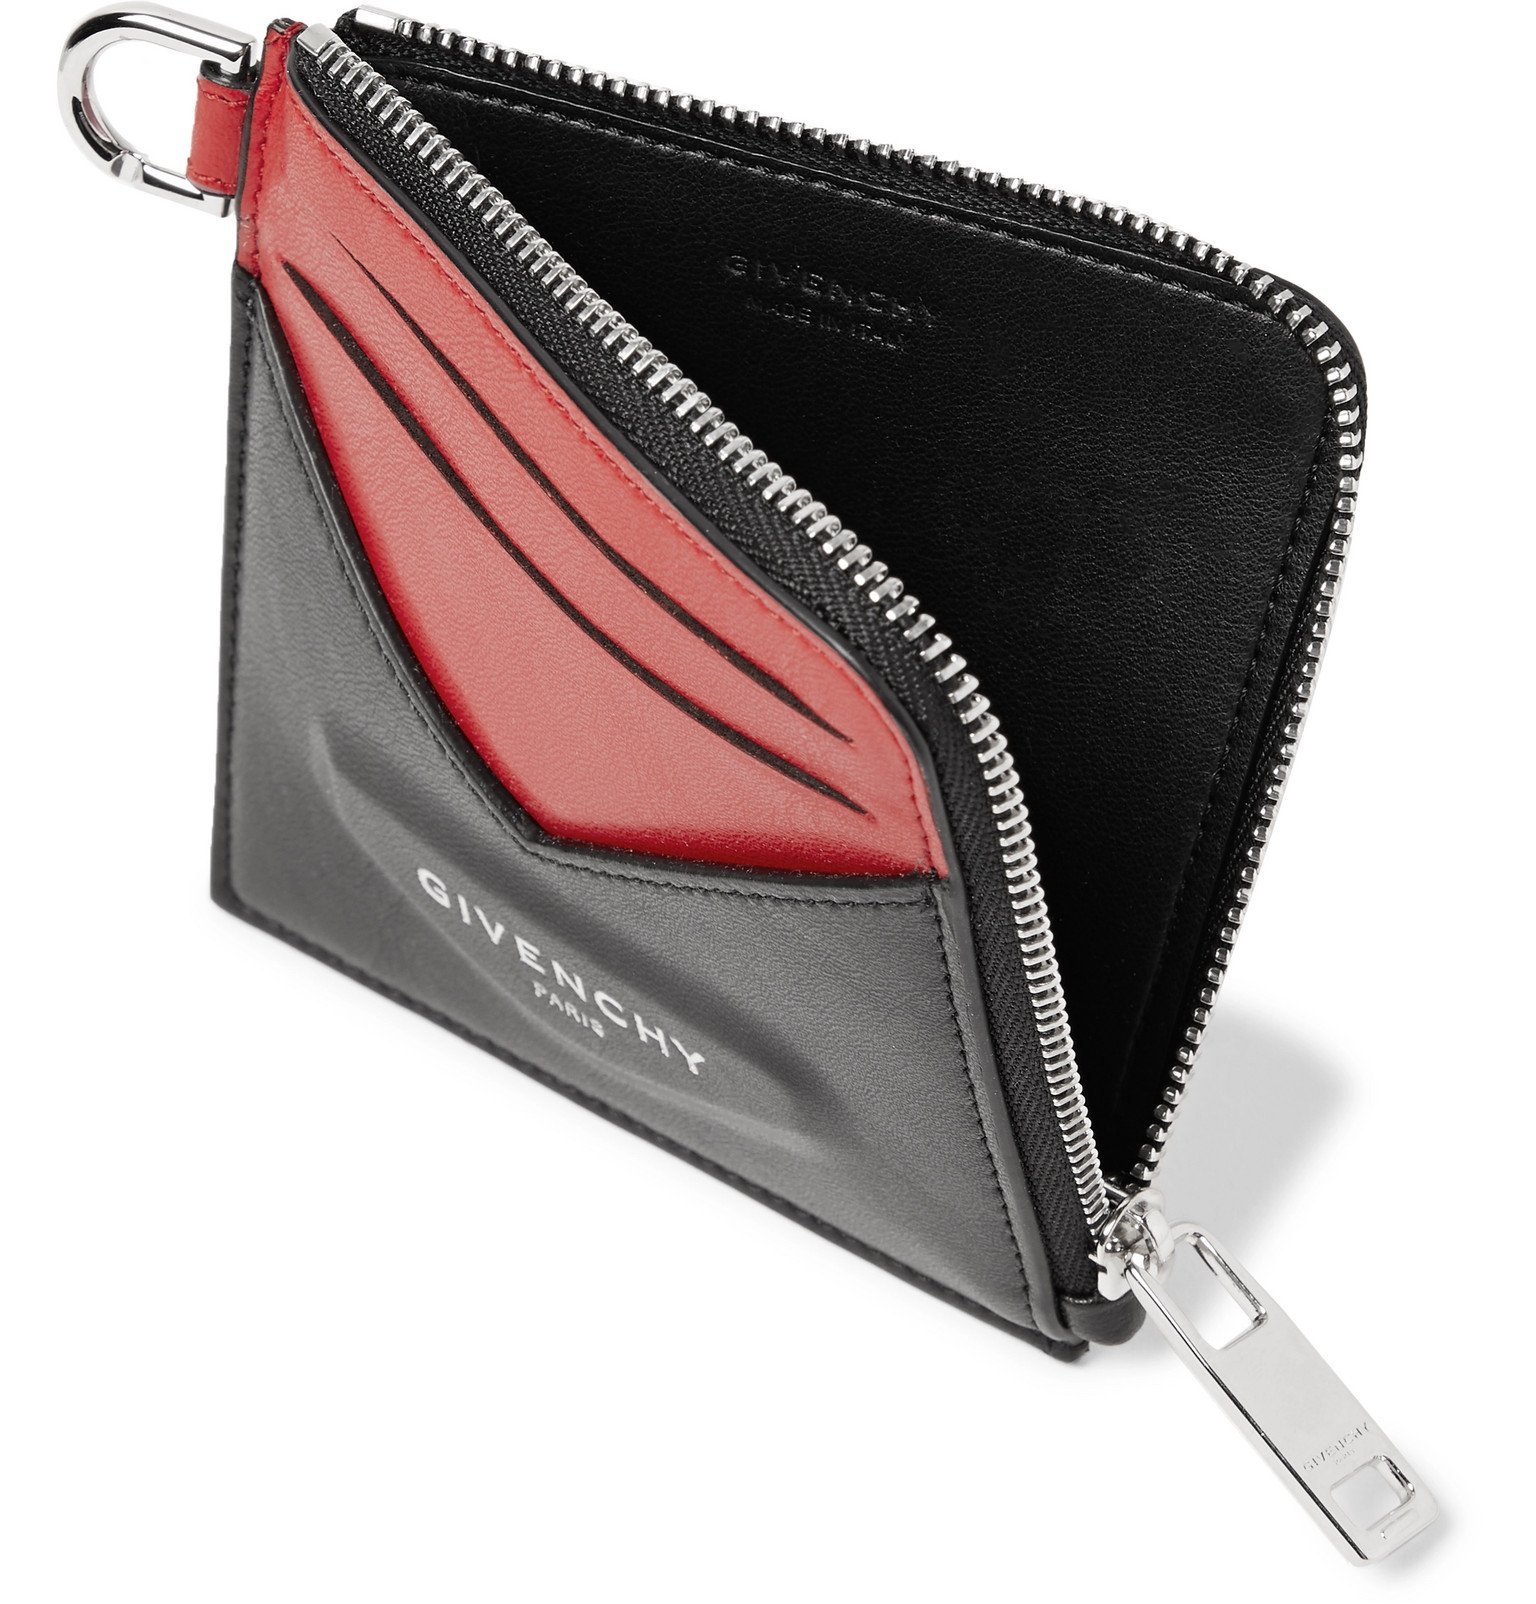 Givenchy - Logo-Print Colour-Block Leather Zip-Around Cardholder - Black  Givenchy